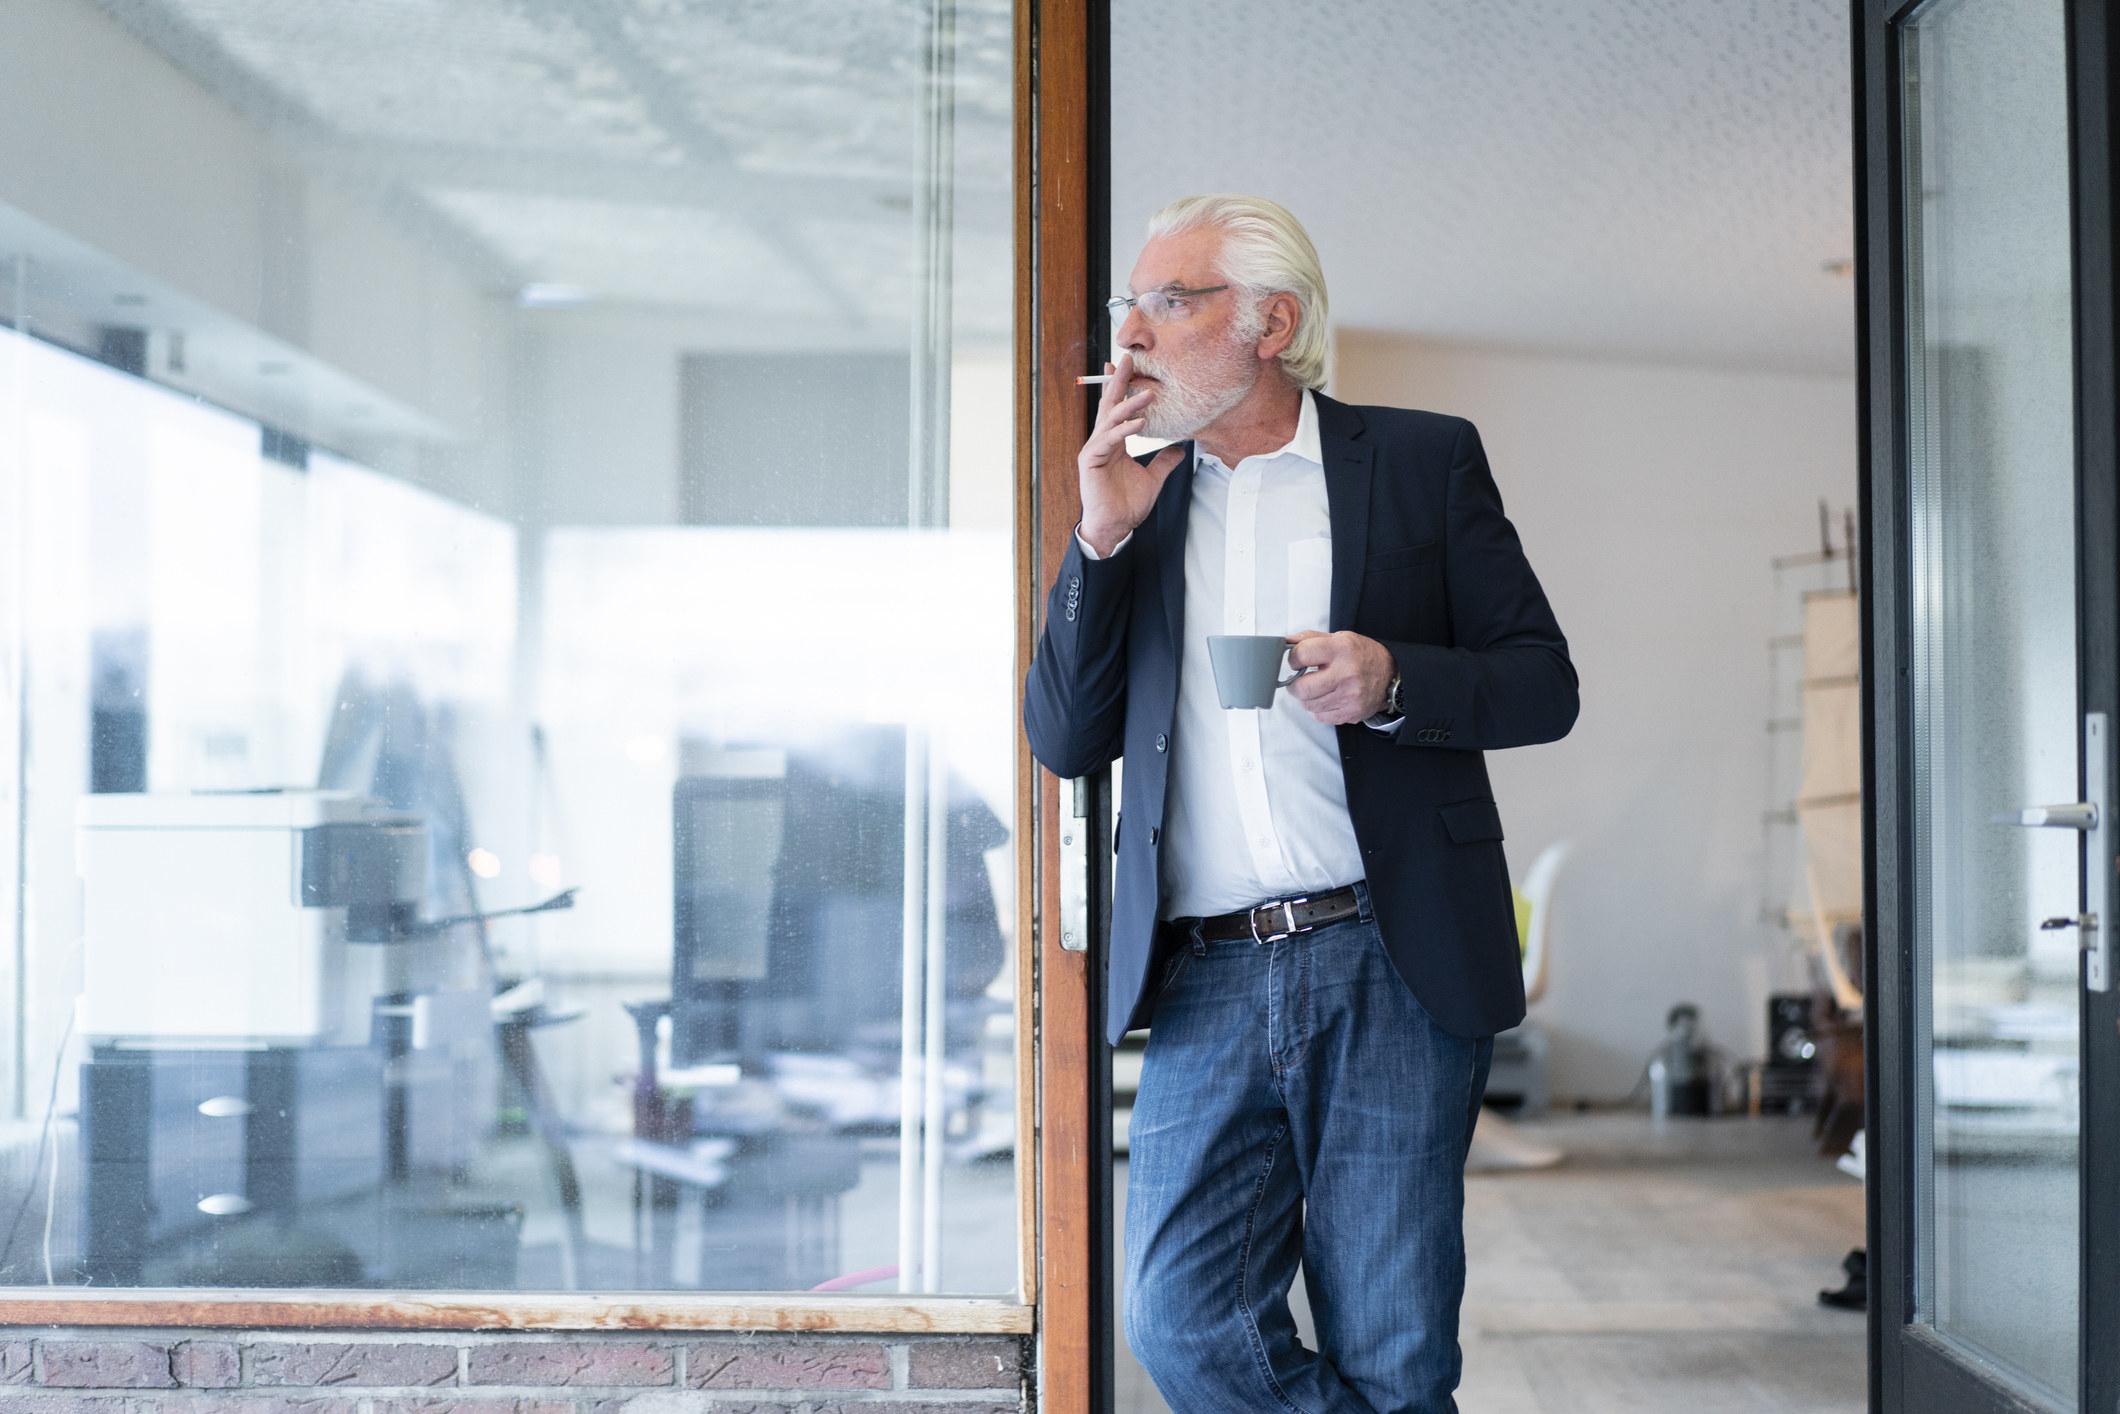 Man standing in a doorway smoking and holding a mug